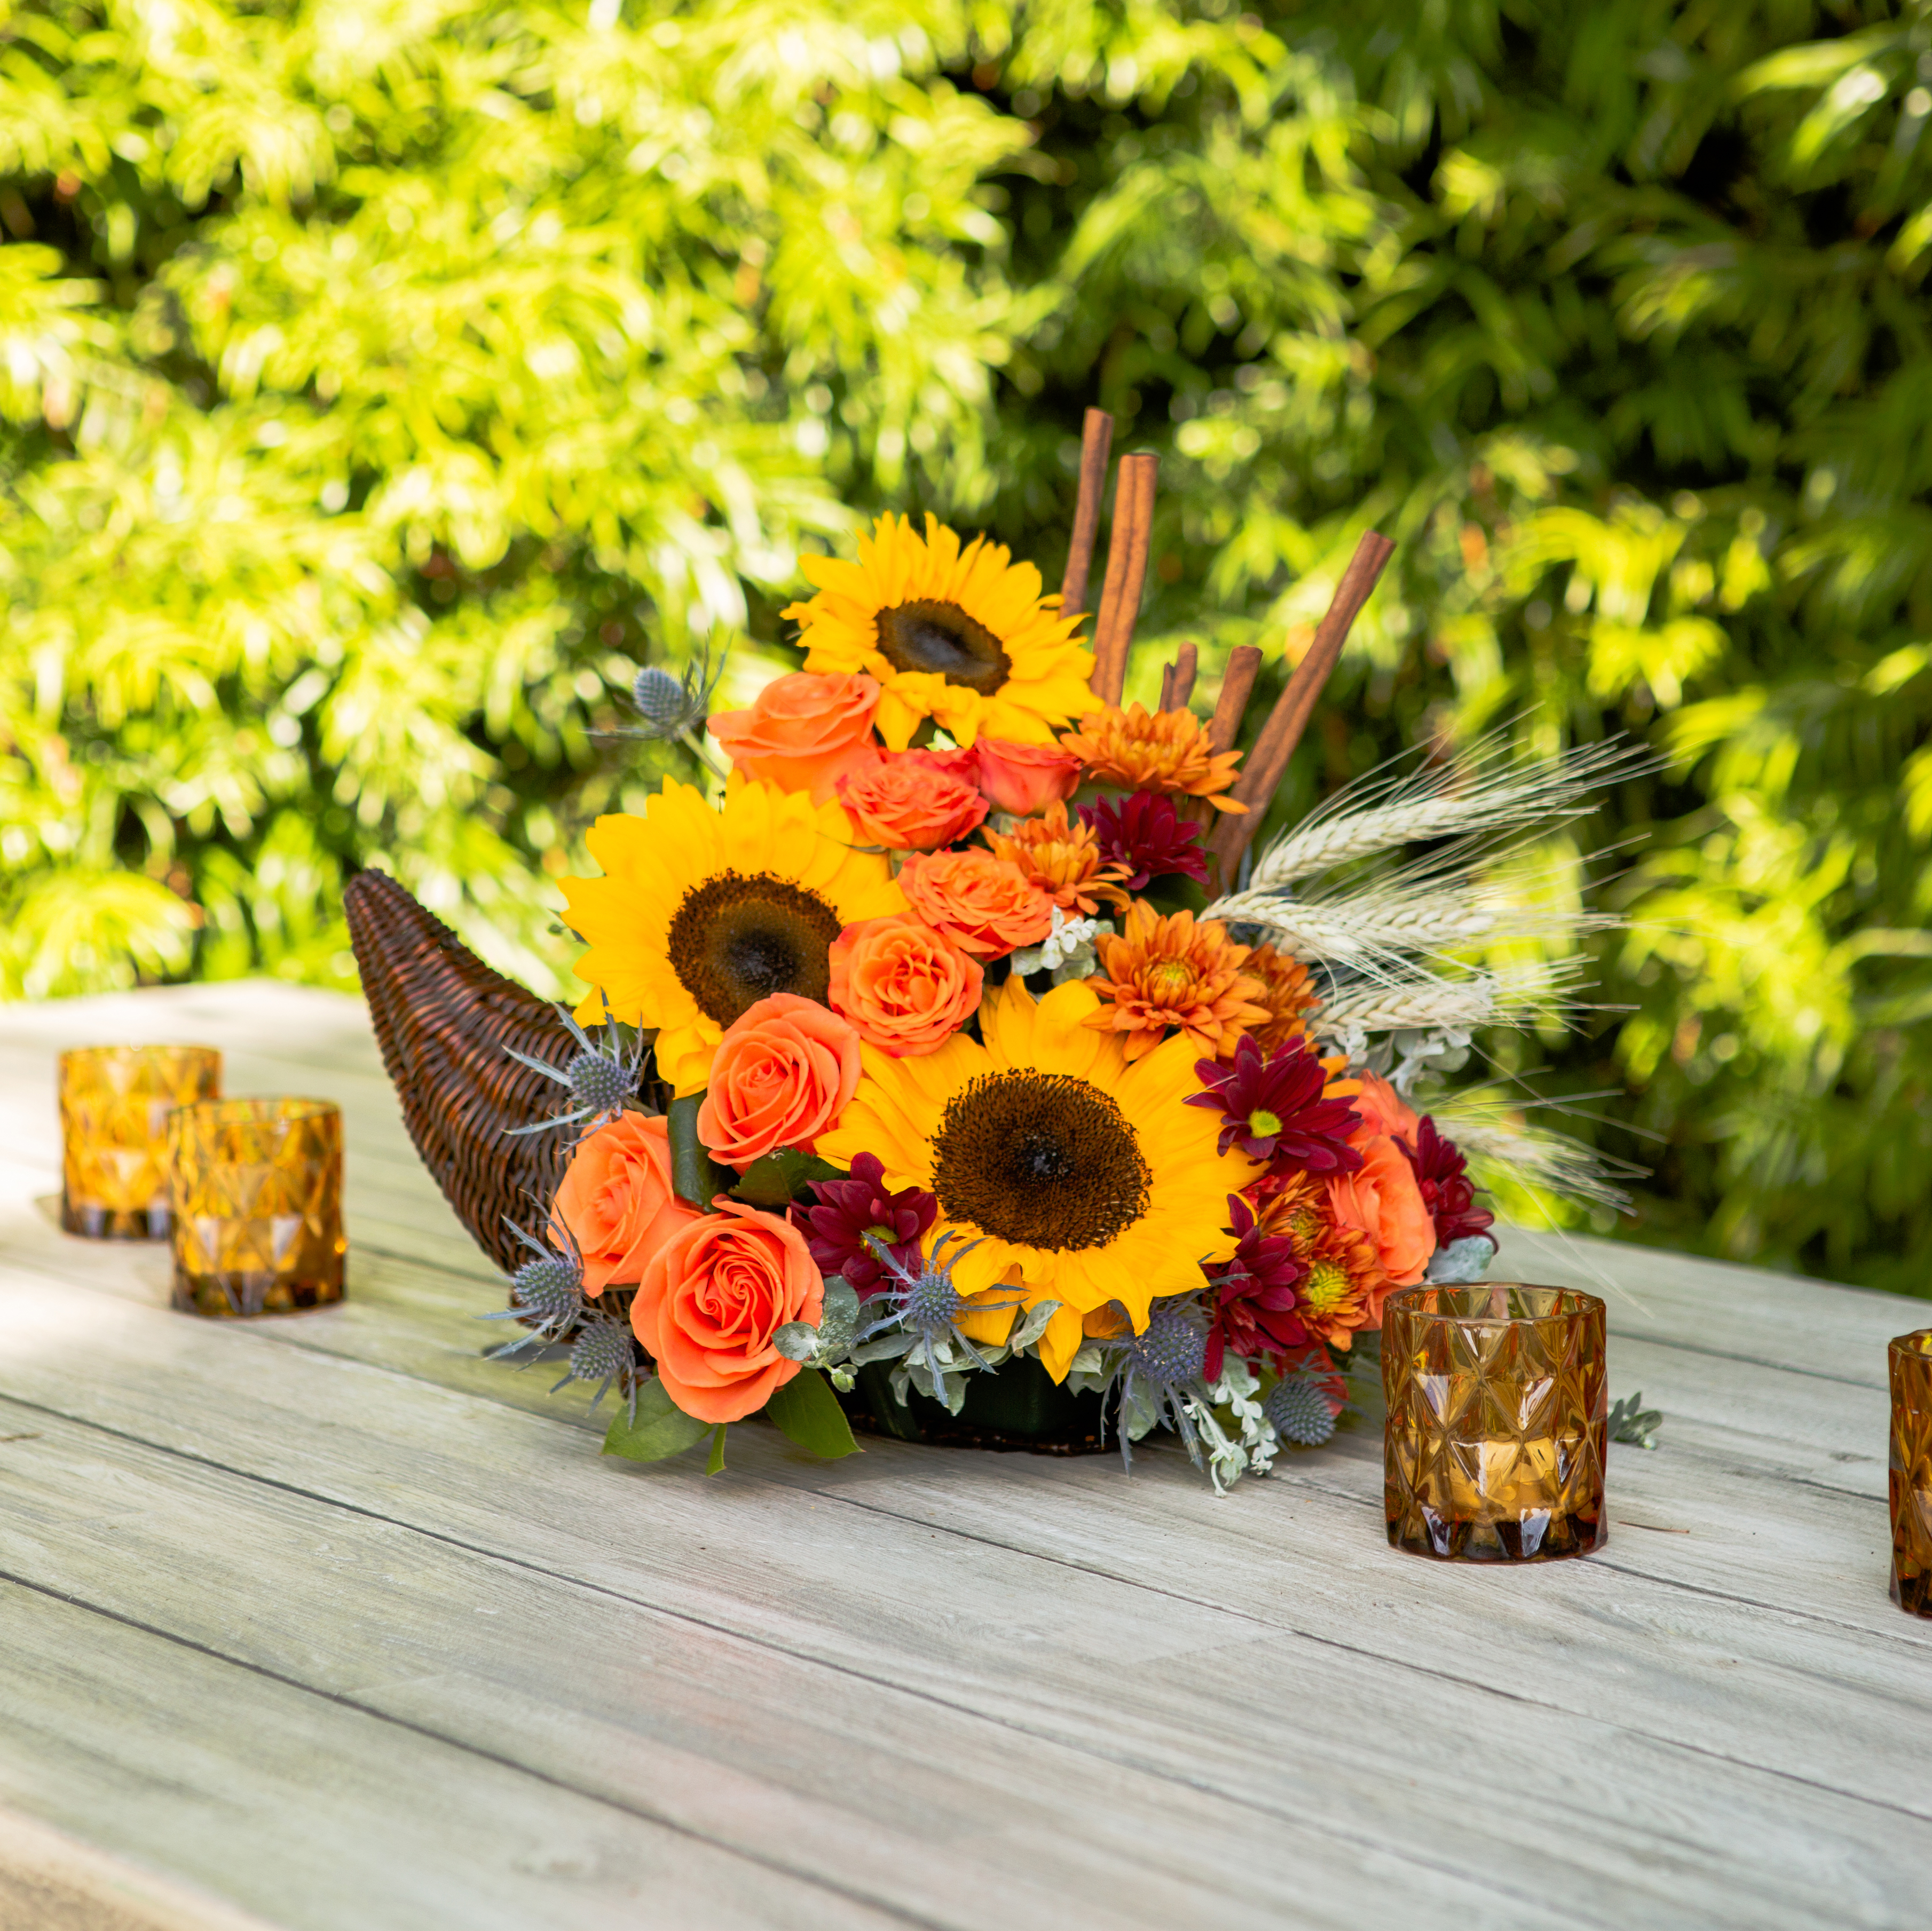 Sunflowers, orange roses, and more in wicker cornucopia on outdoor table